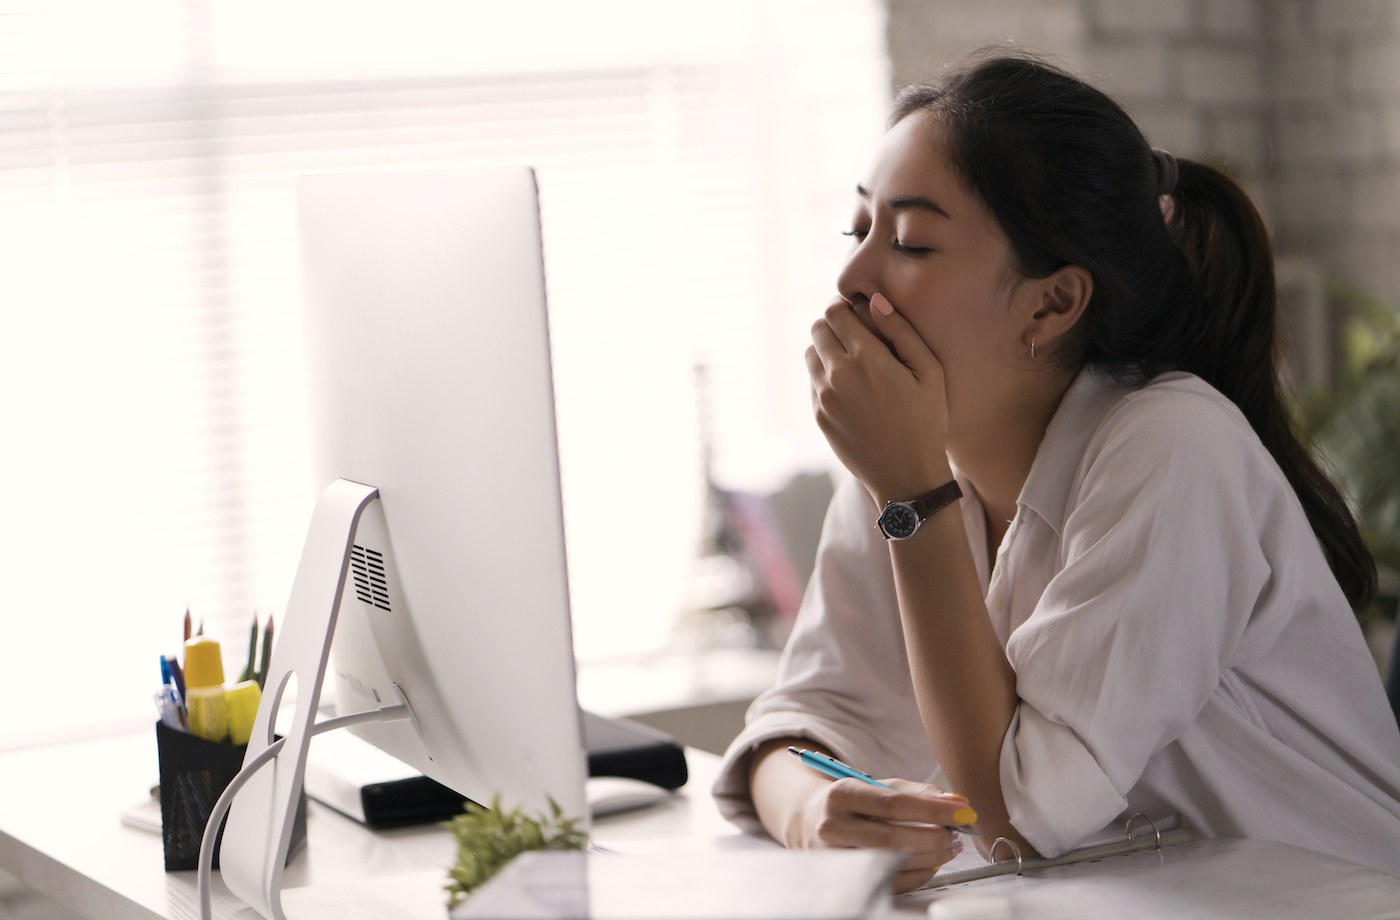 how to stay awake without caffeine woman yawning in front of computer screen